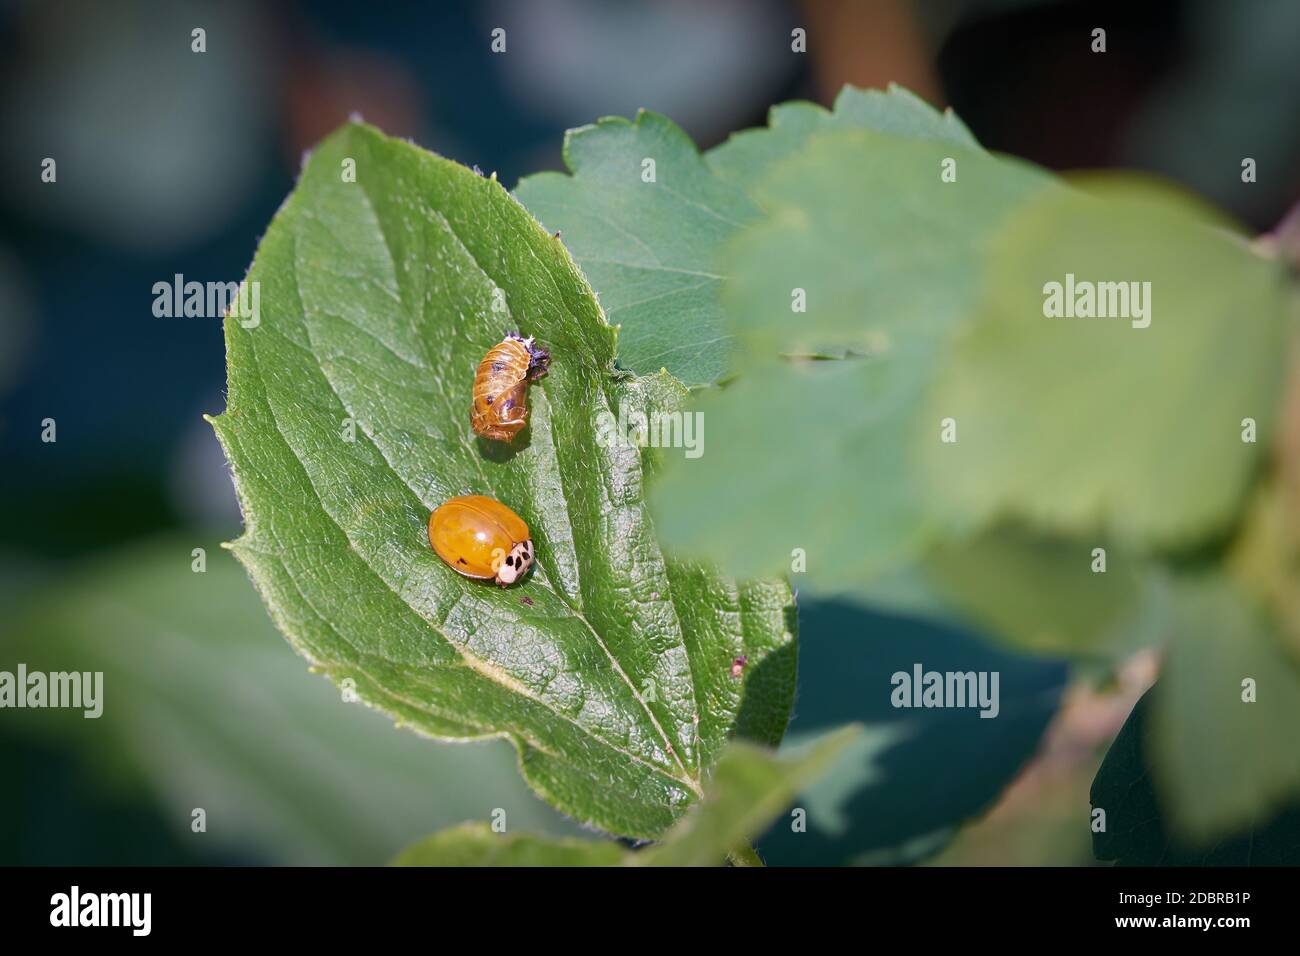 freshly hatched ladybird with the empty pupa-case on a leaf Stock Photo